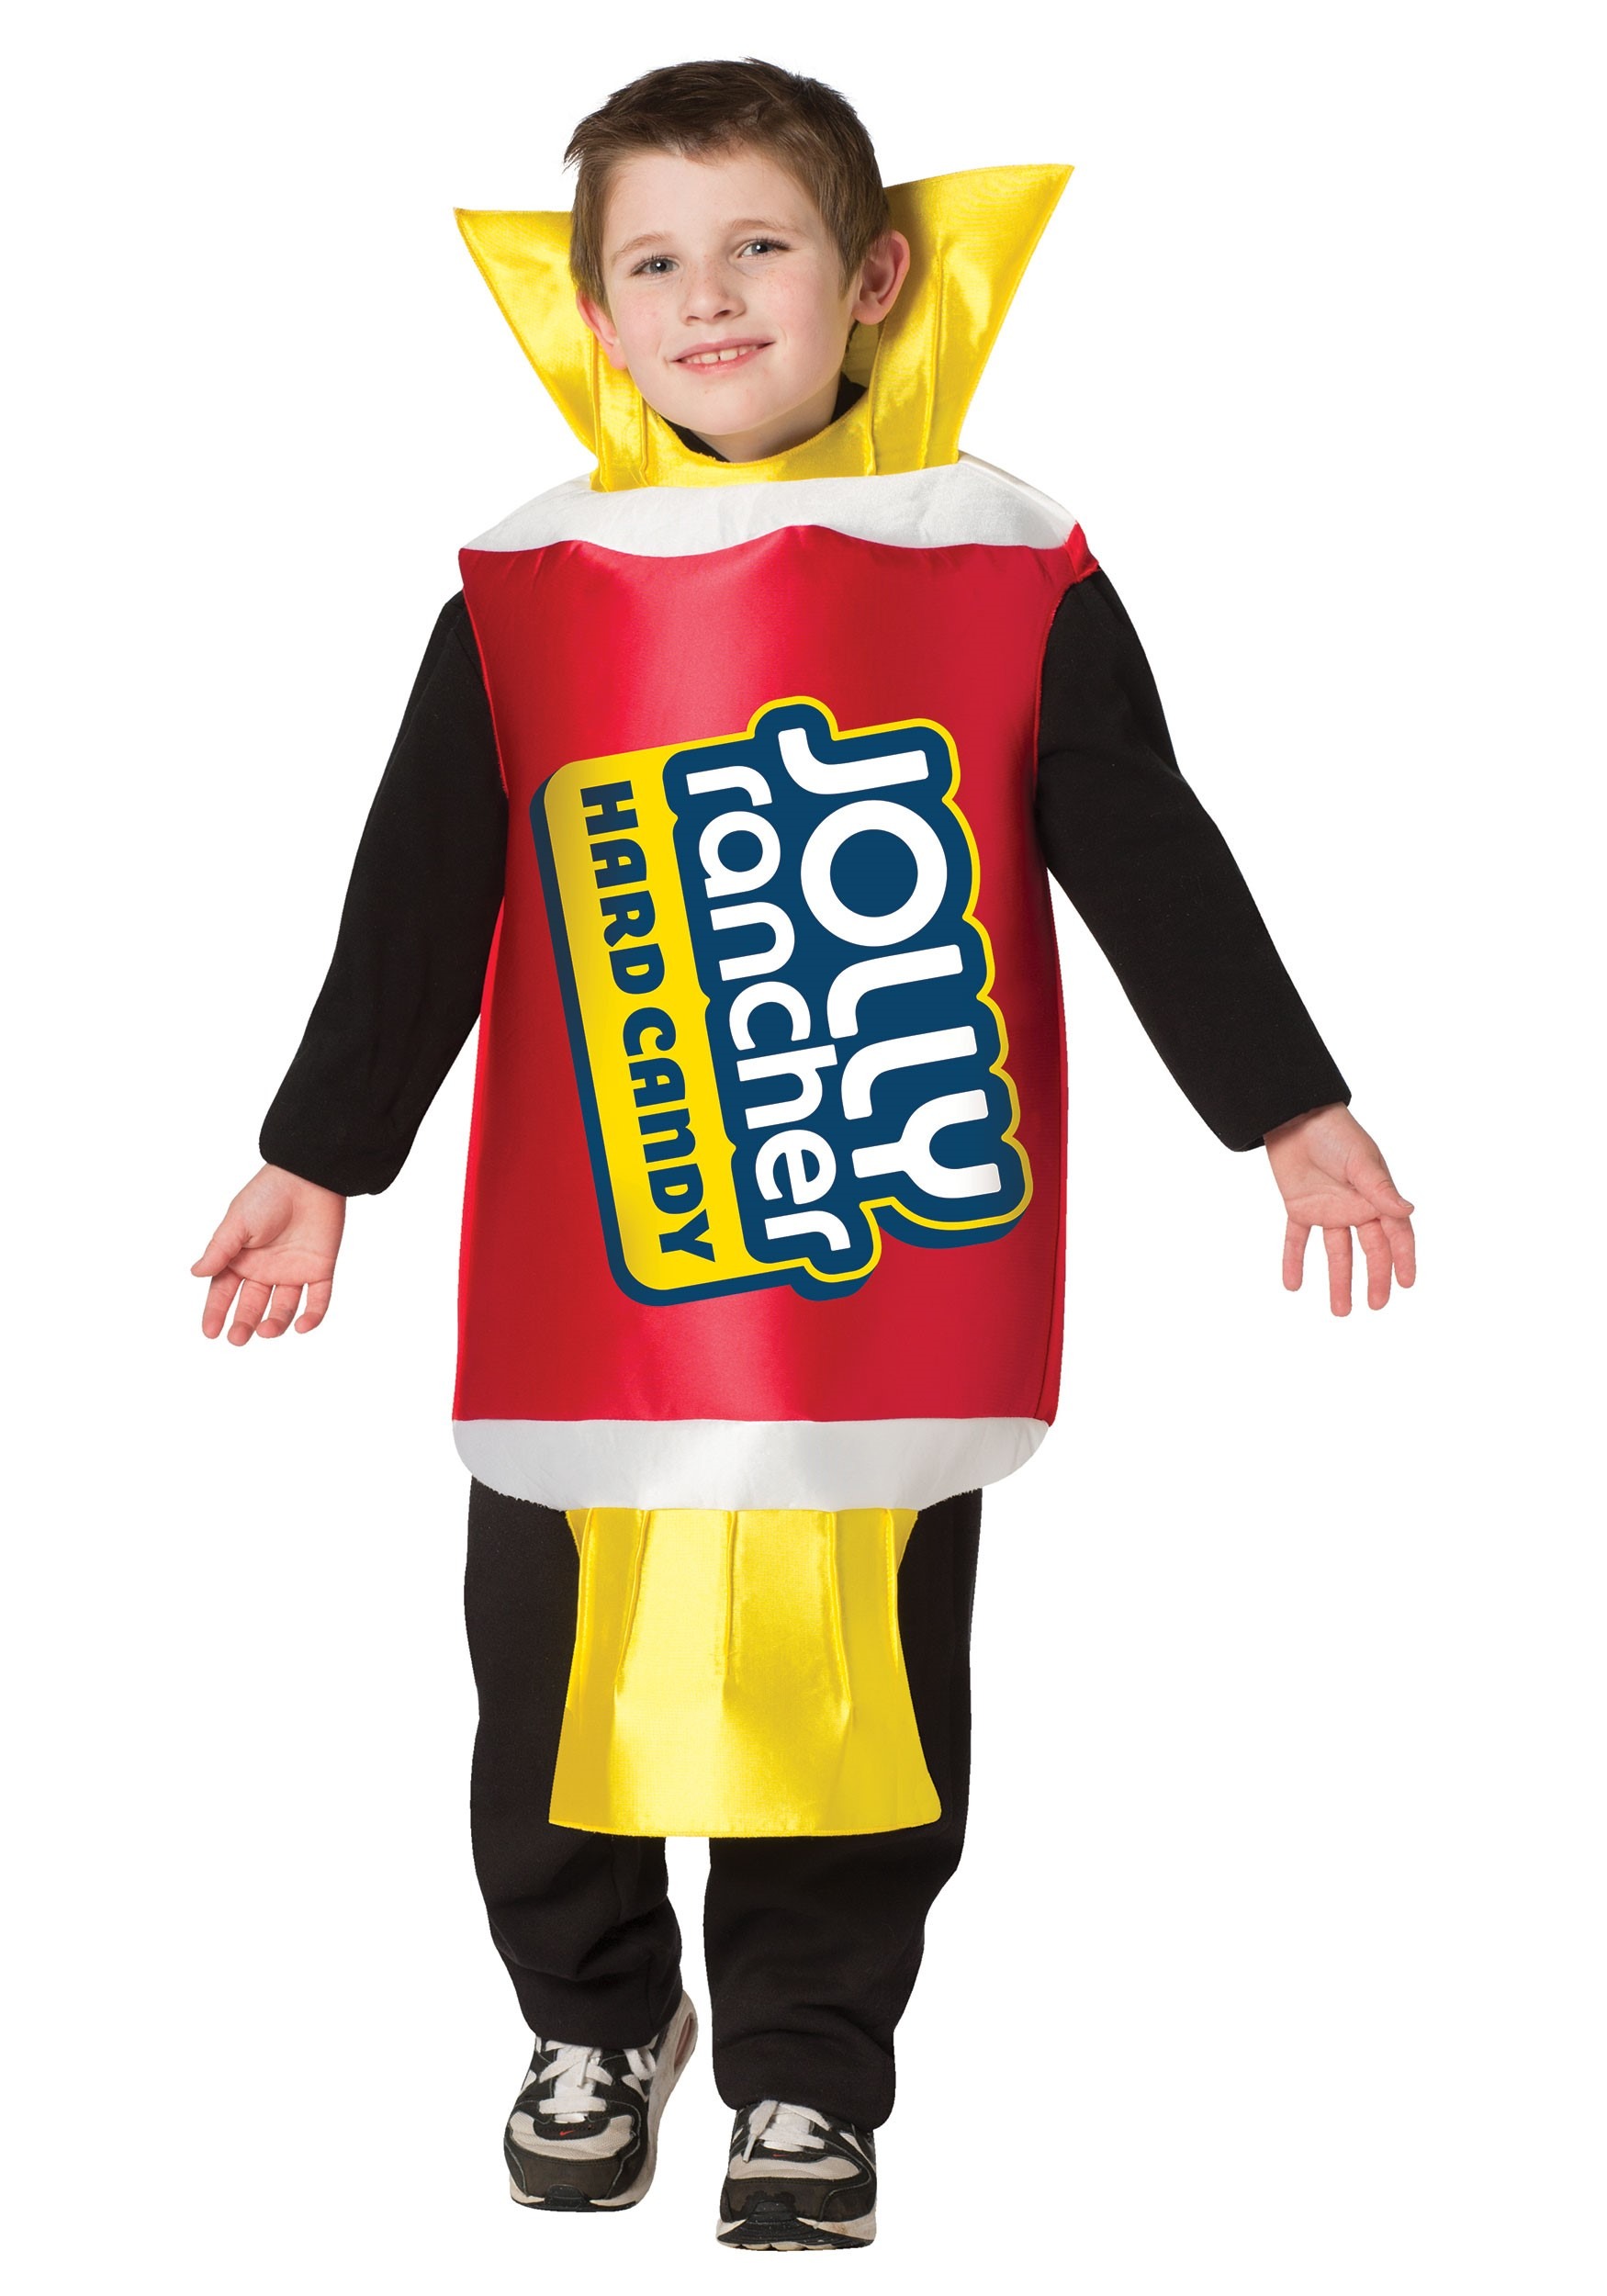 Cherry Jolly Rancher Costume for Kids